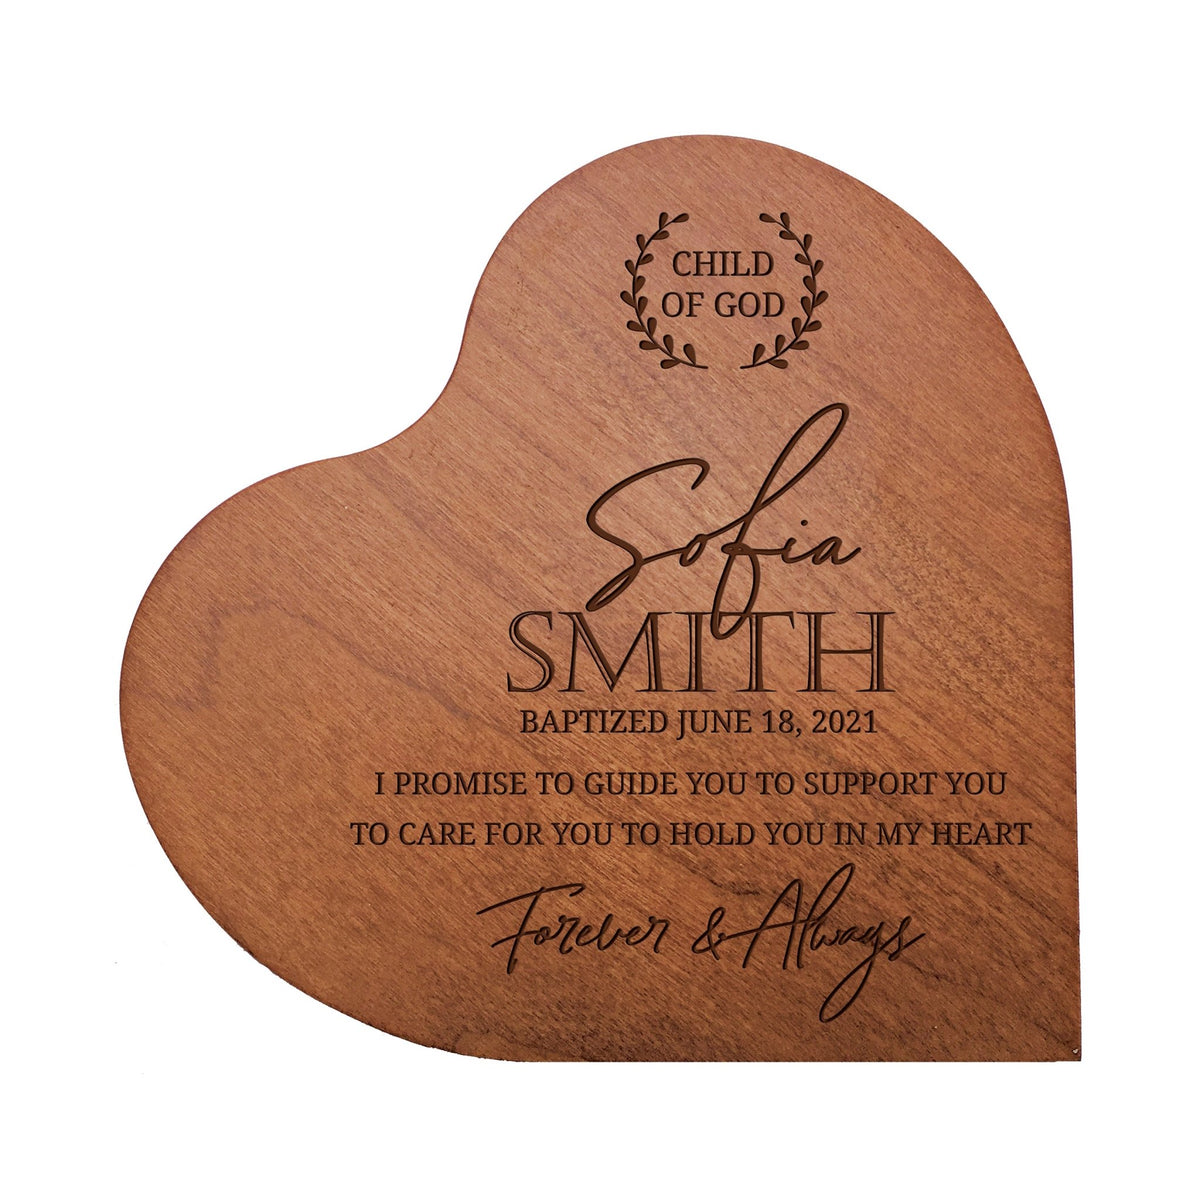 Personalized Baptism Solid Wood Heart Decoration With Inspirational Verse Keepsake Gift 5x5.25 - I Promise To Guide - LifeSong Milestones